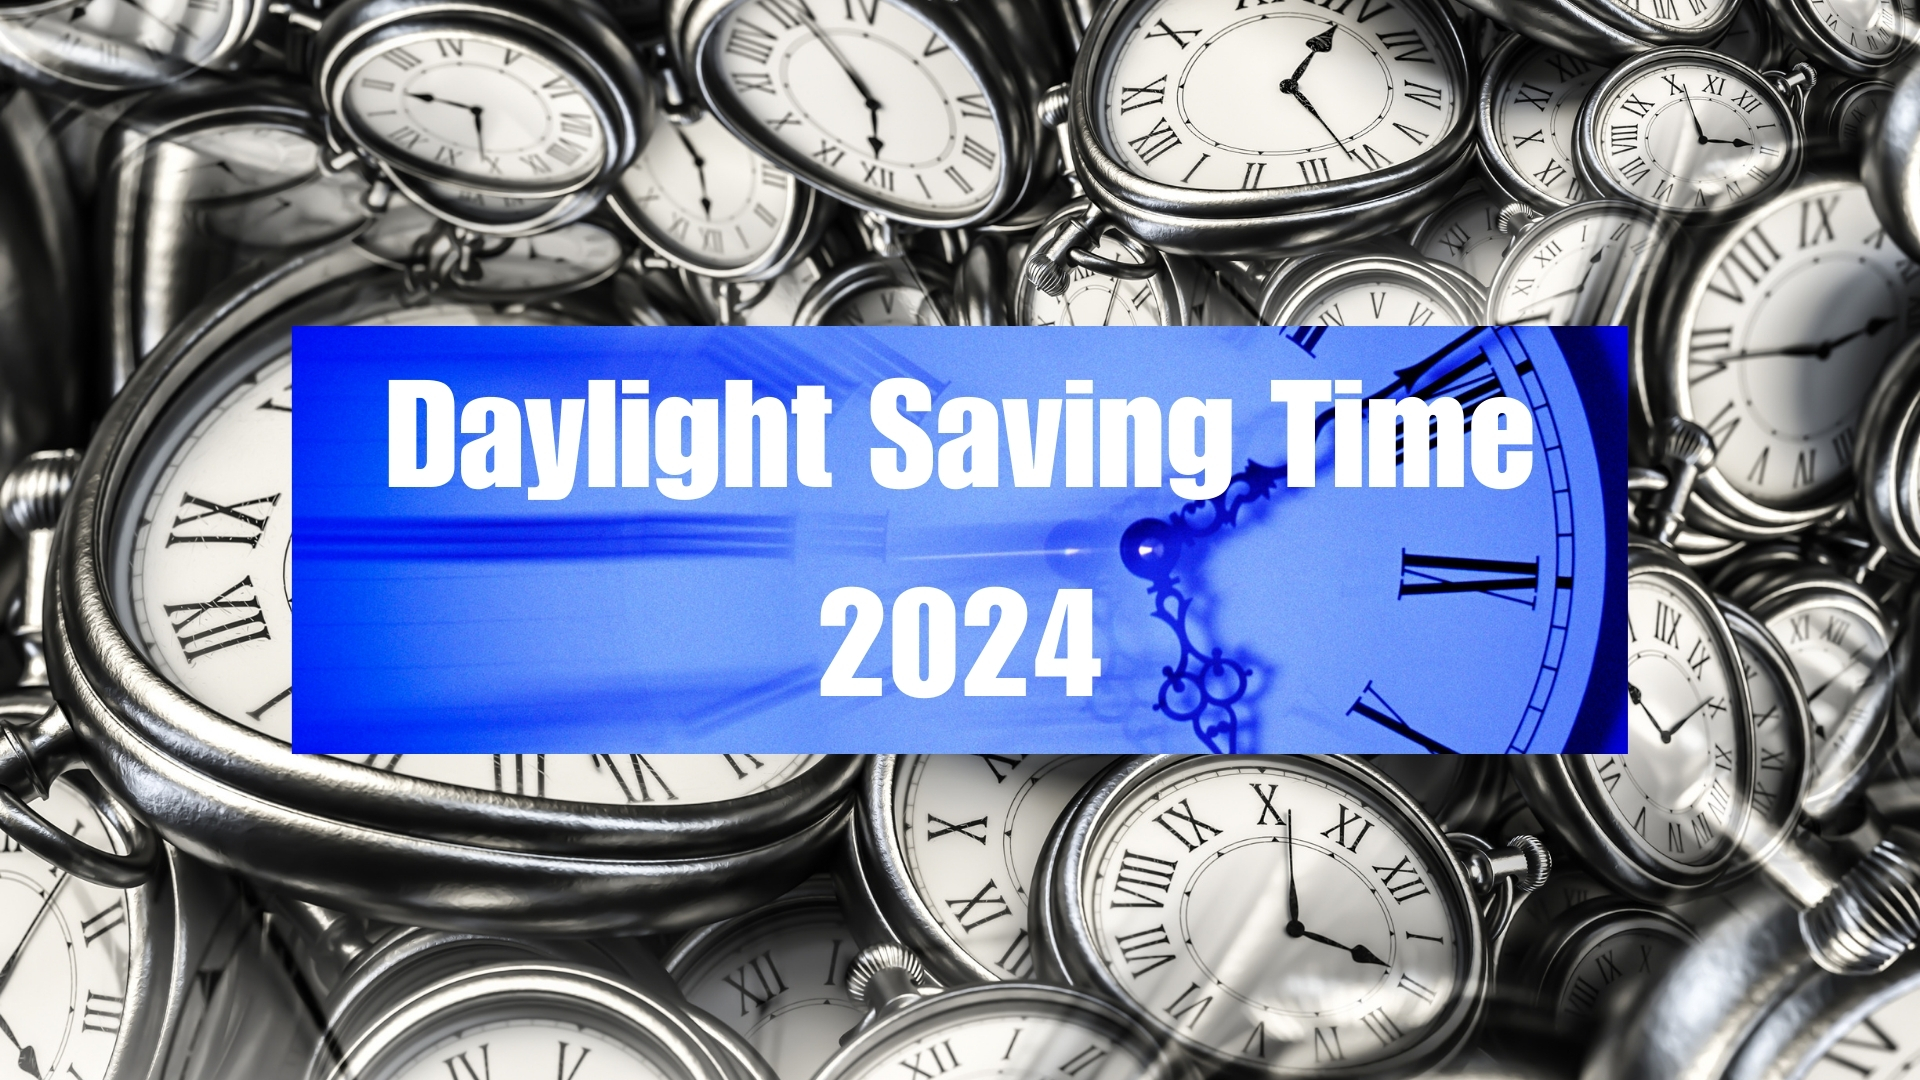 Time change for 2024 daylight saving happened Sunday. Here are